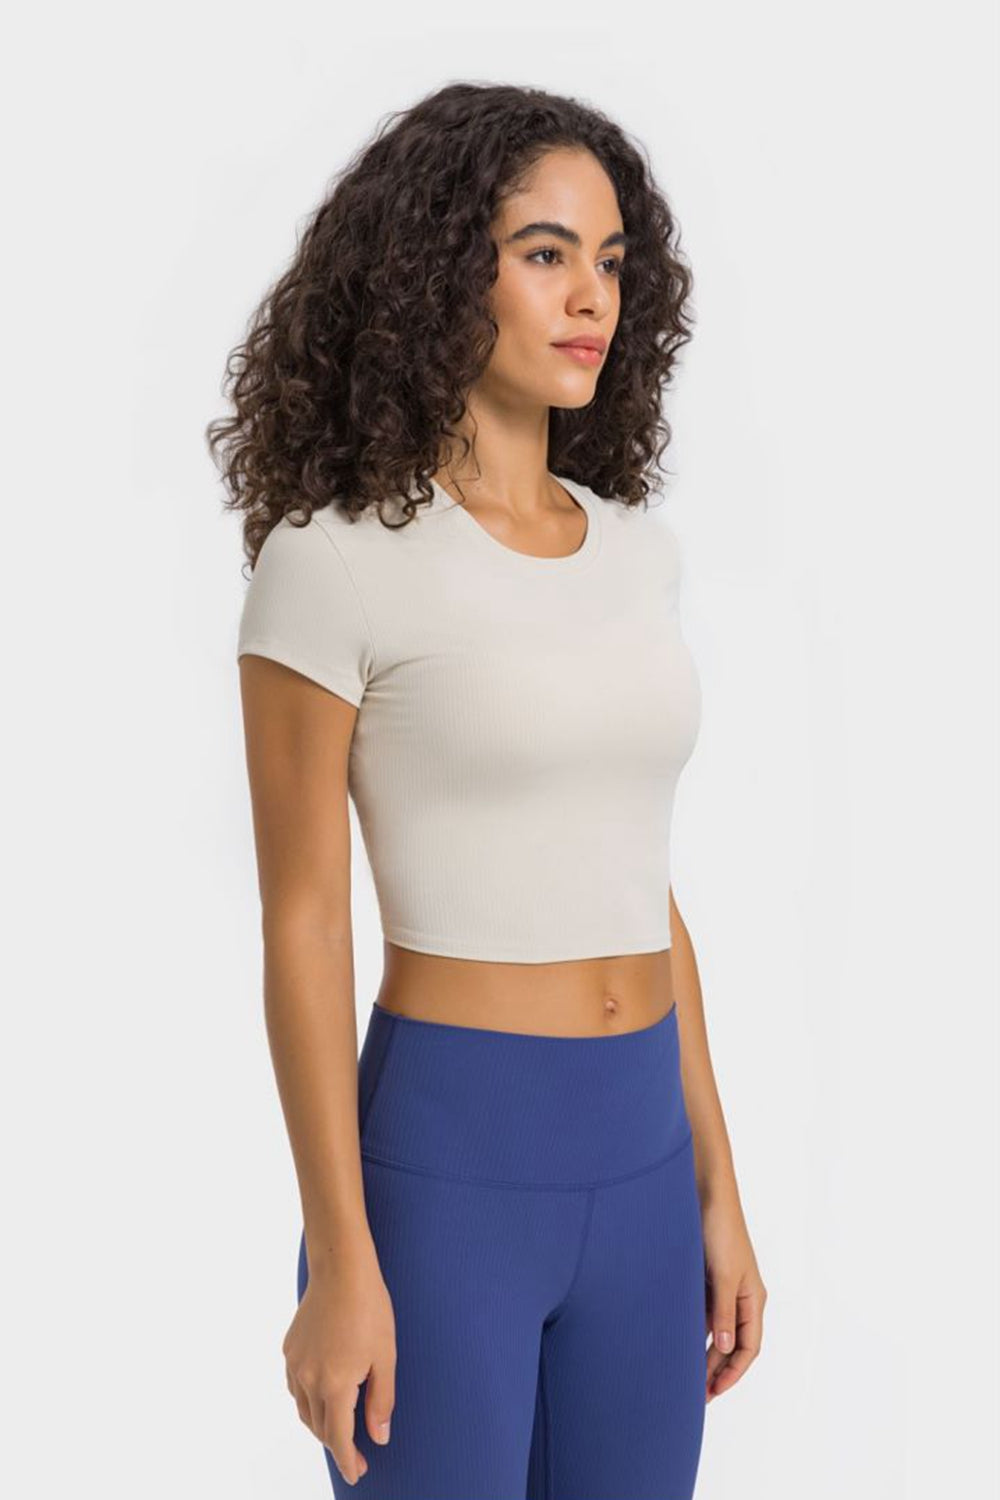 Round Neck Short Sleeve Cropped Sports T-Shirt - Crop Tops & Tank Tops - FITGGINS